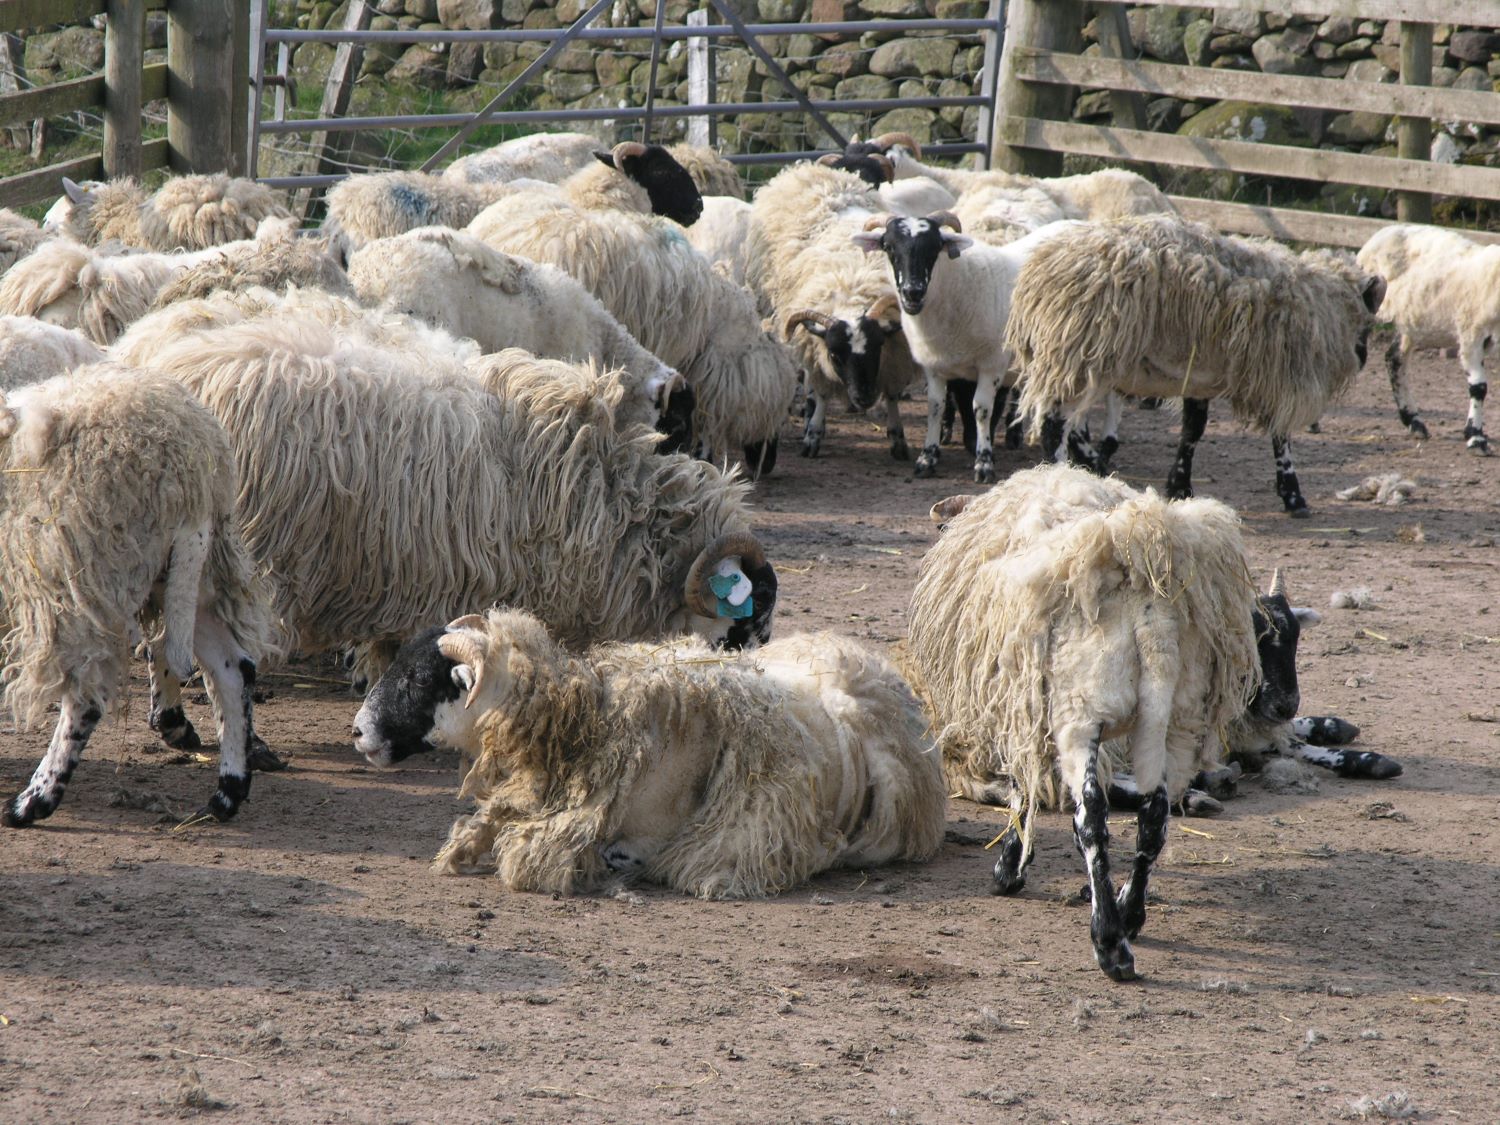 Testing for sheep scab could prevent unnecessary treatment costs